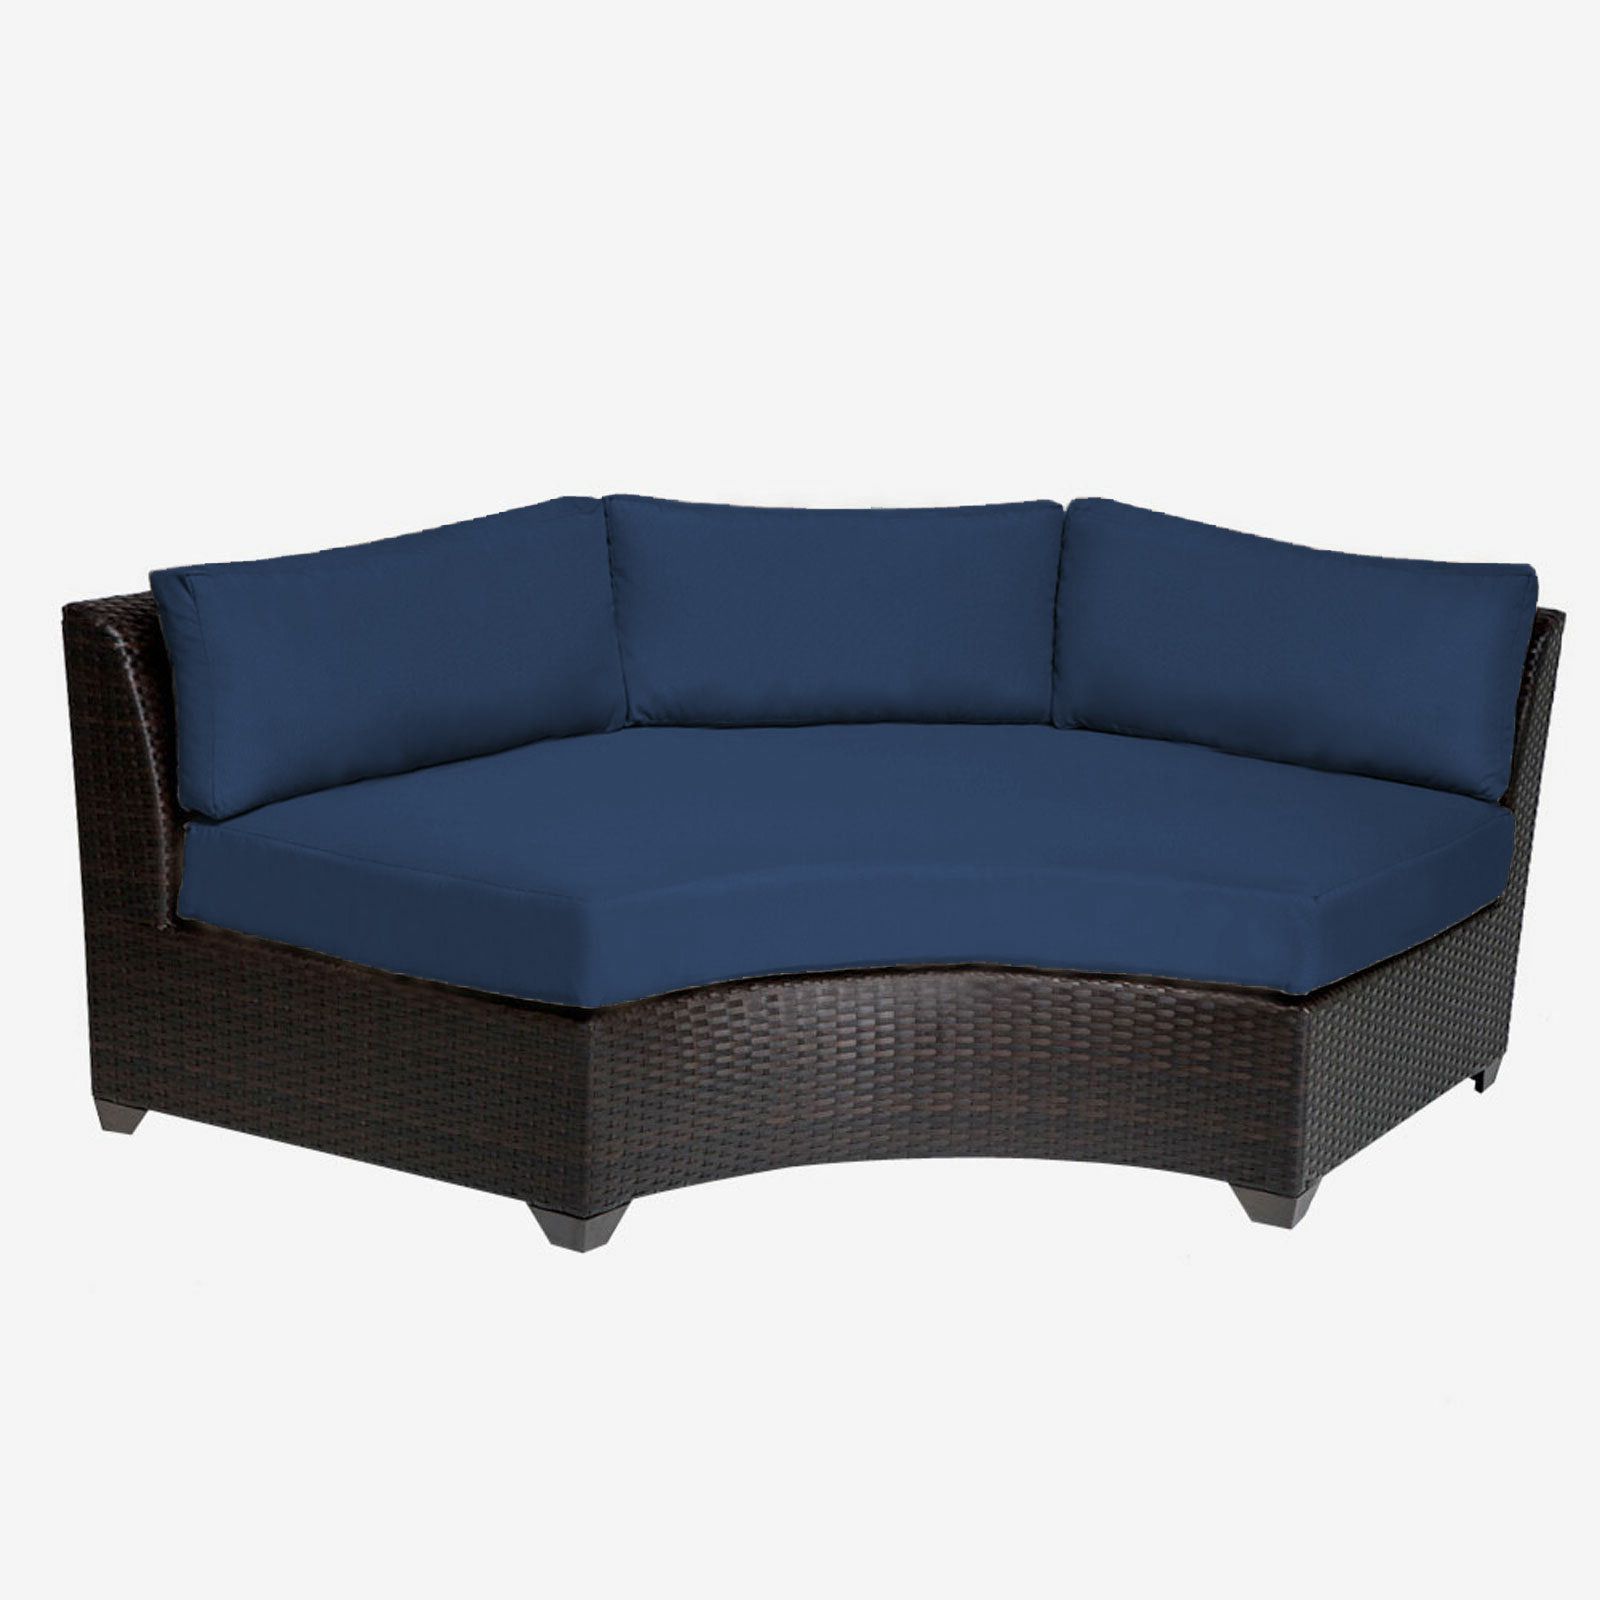 Well Known Sol 72 Outdoor Tegan Patio Sofa With Cushions & Reviews Regarding Tegan Patio Sofas With Cushions (View 5 of 25)